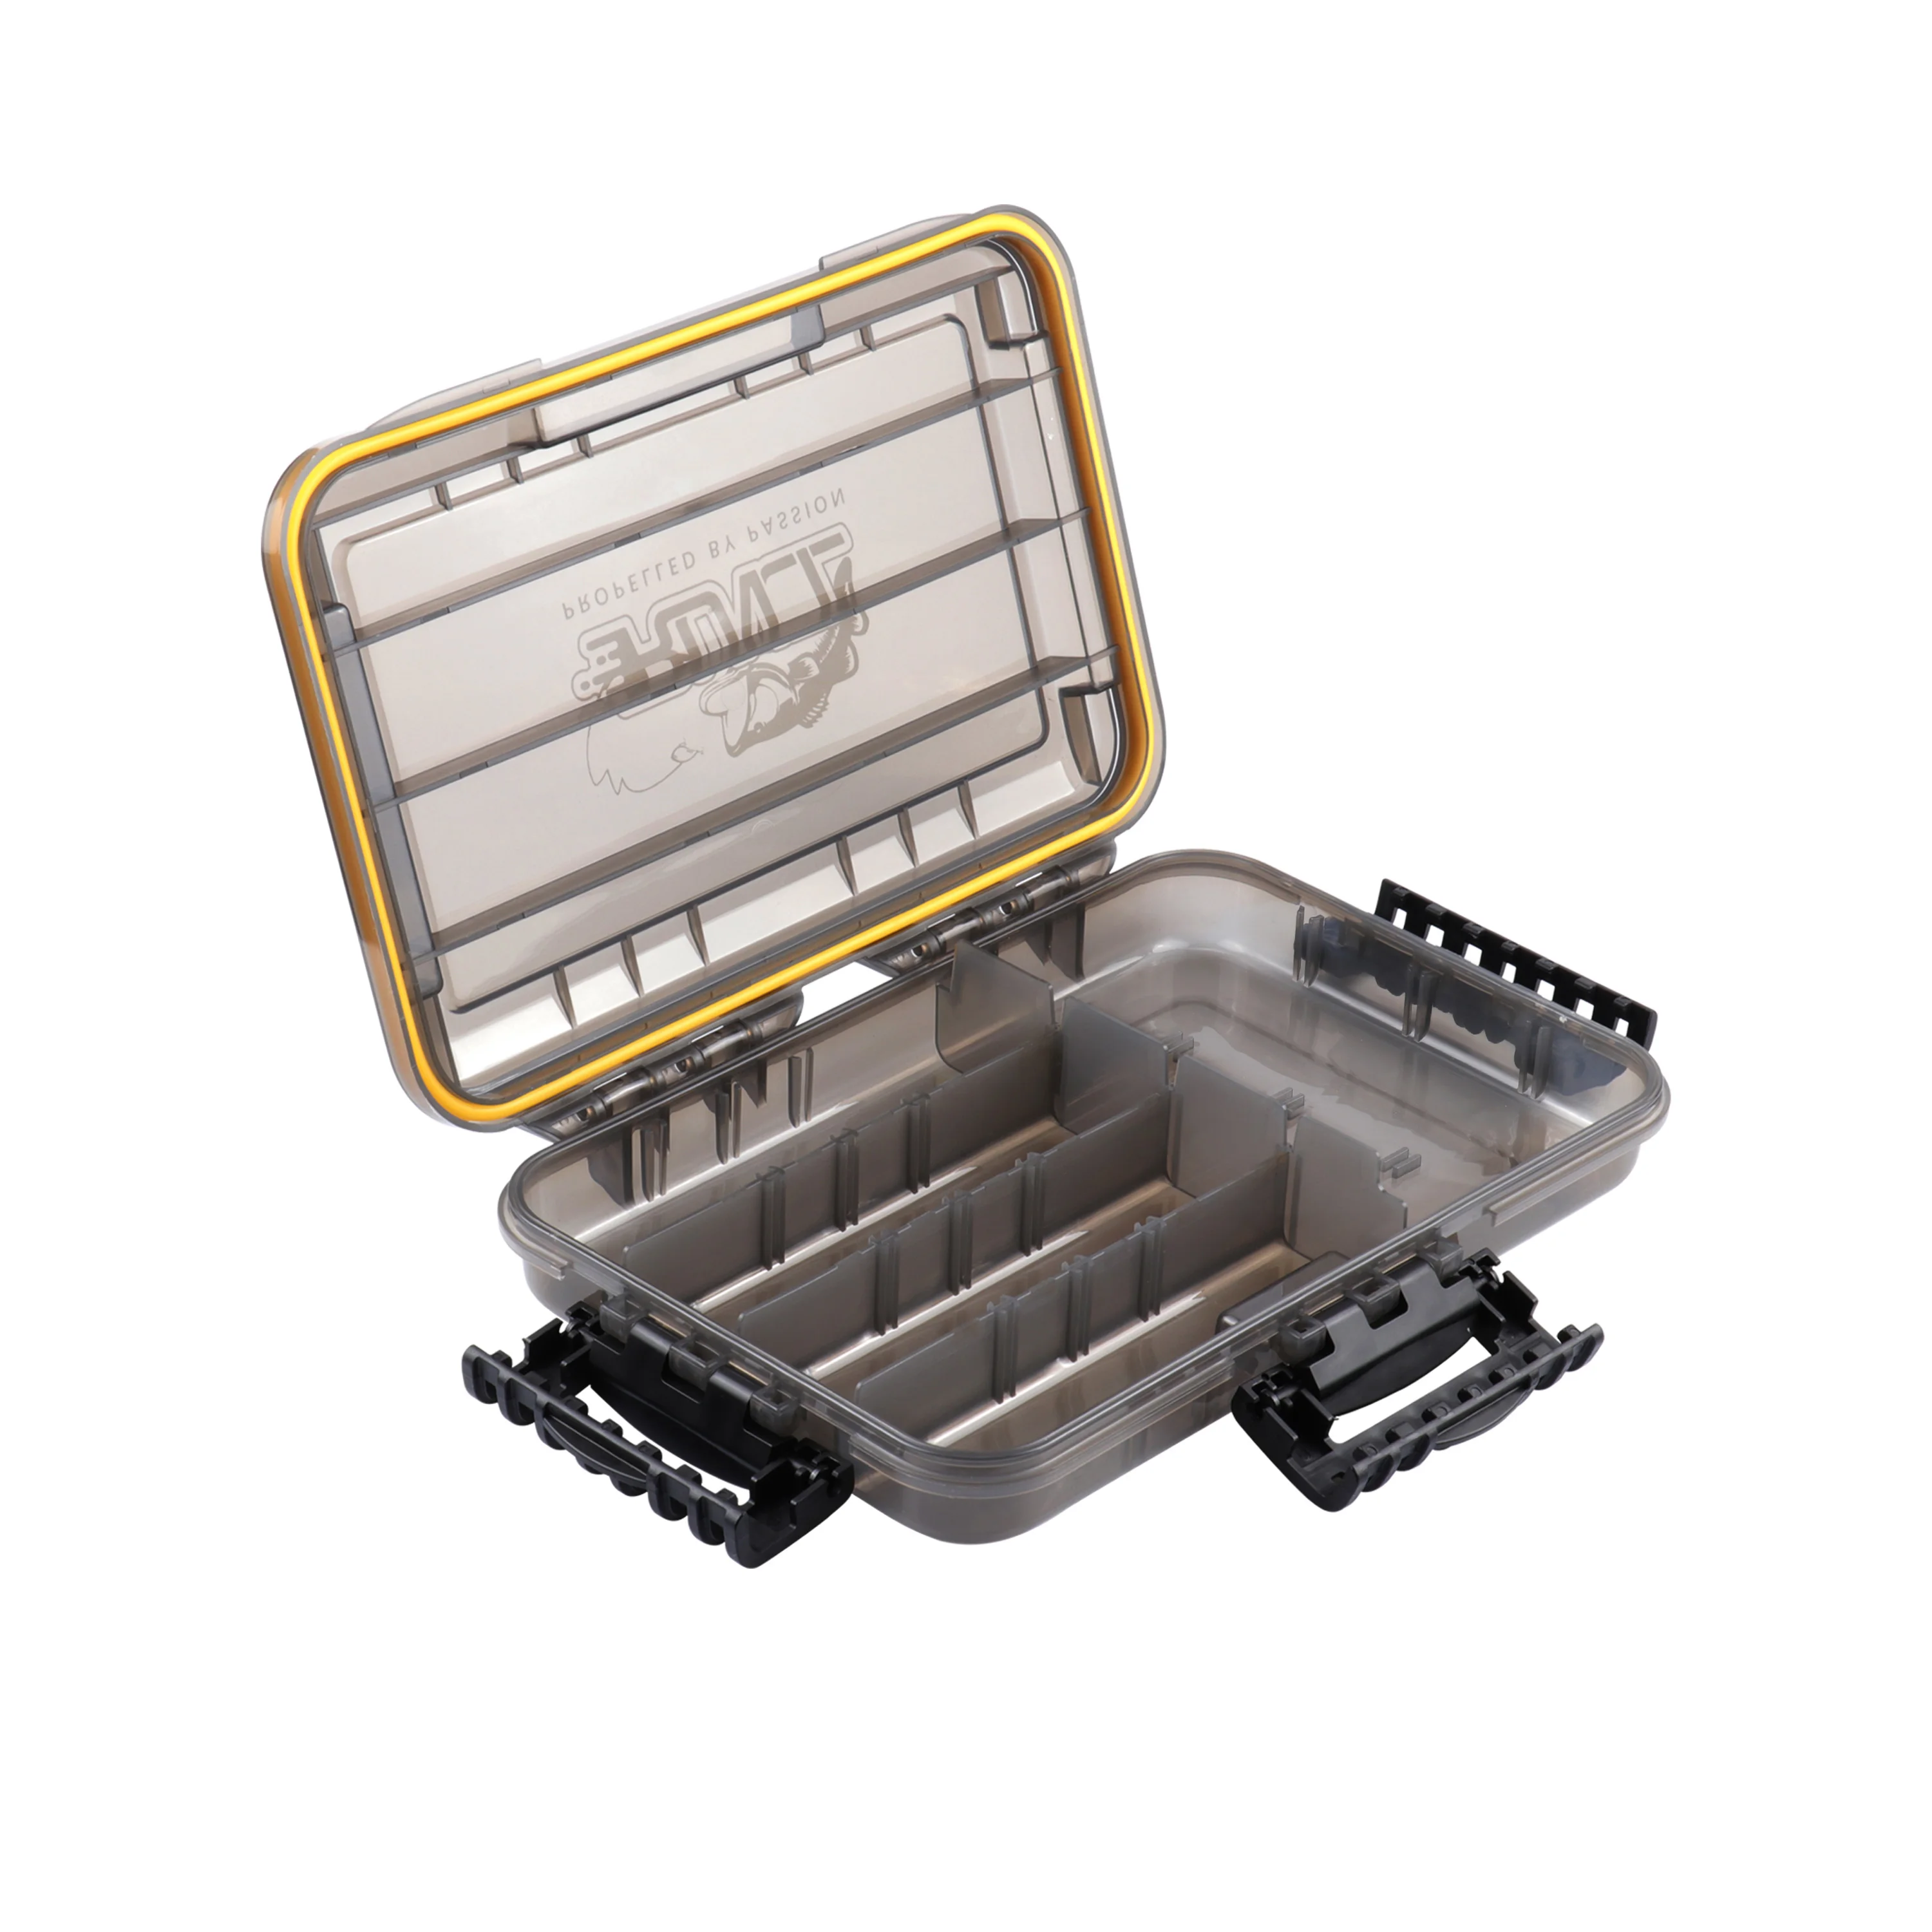 

RUNCL Waterproof Seal Tackle Box Secure-Locking Latches Fishing Lure Tackle Box with Removable Dividers, Dark brown